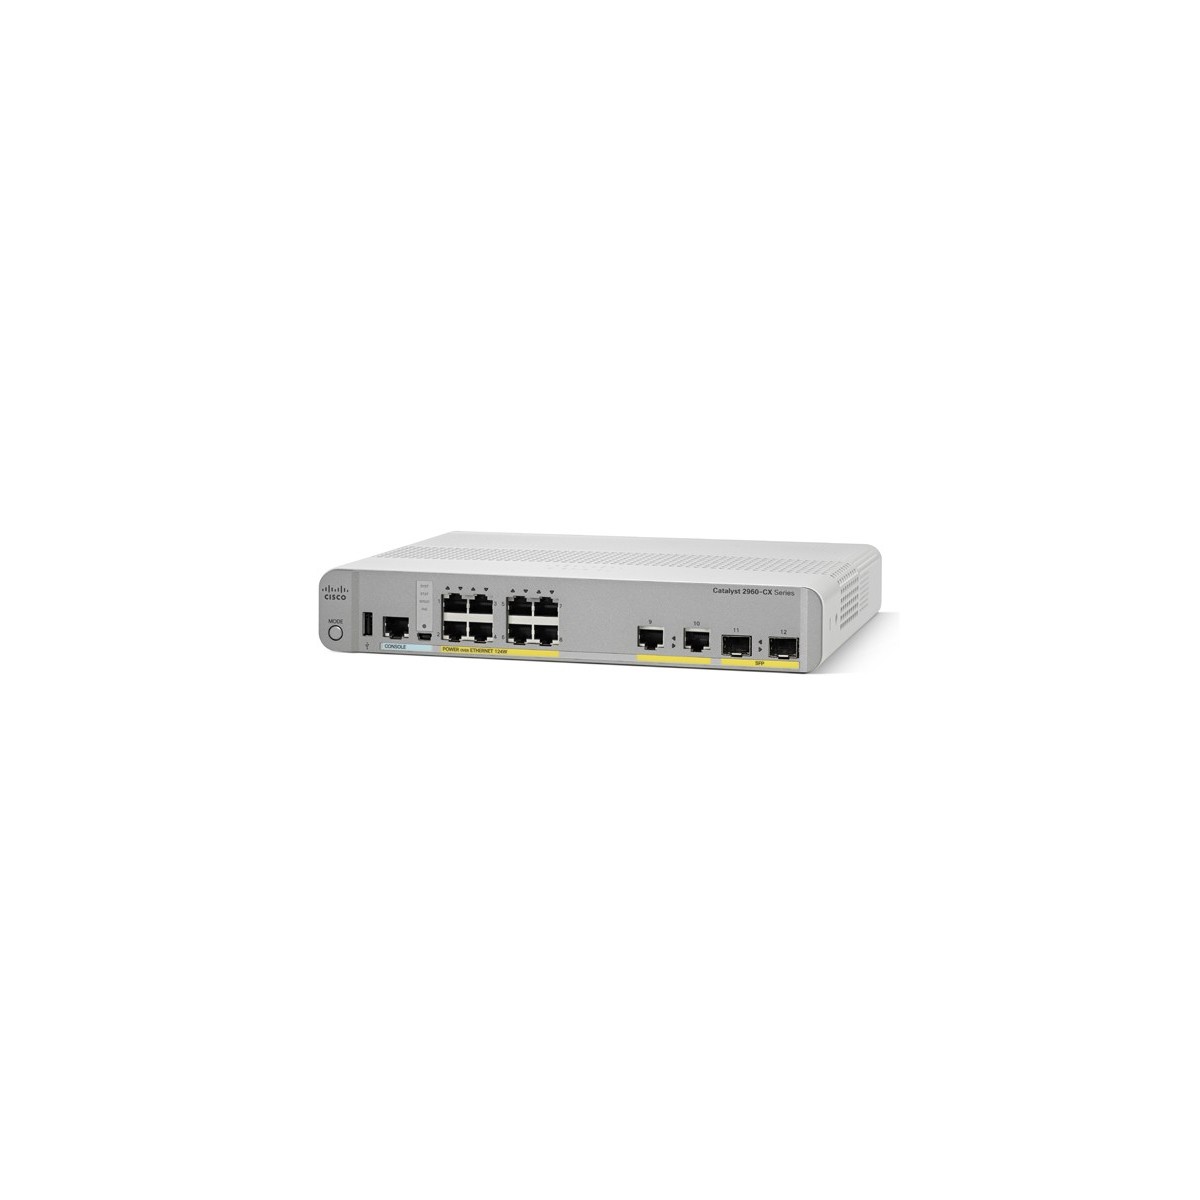 Catalyst 2960-CX Switch 8 GE uplinks: 2 x 1G SFP and 2 x 1G copper - LAN Base